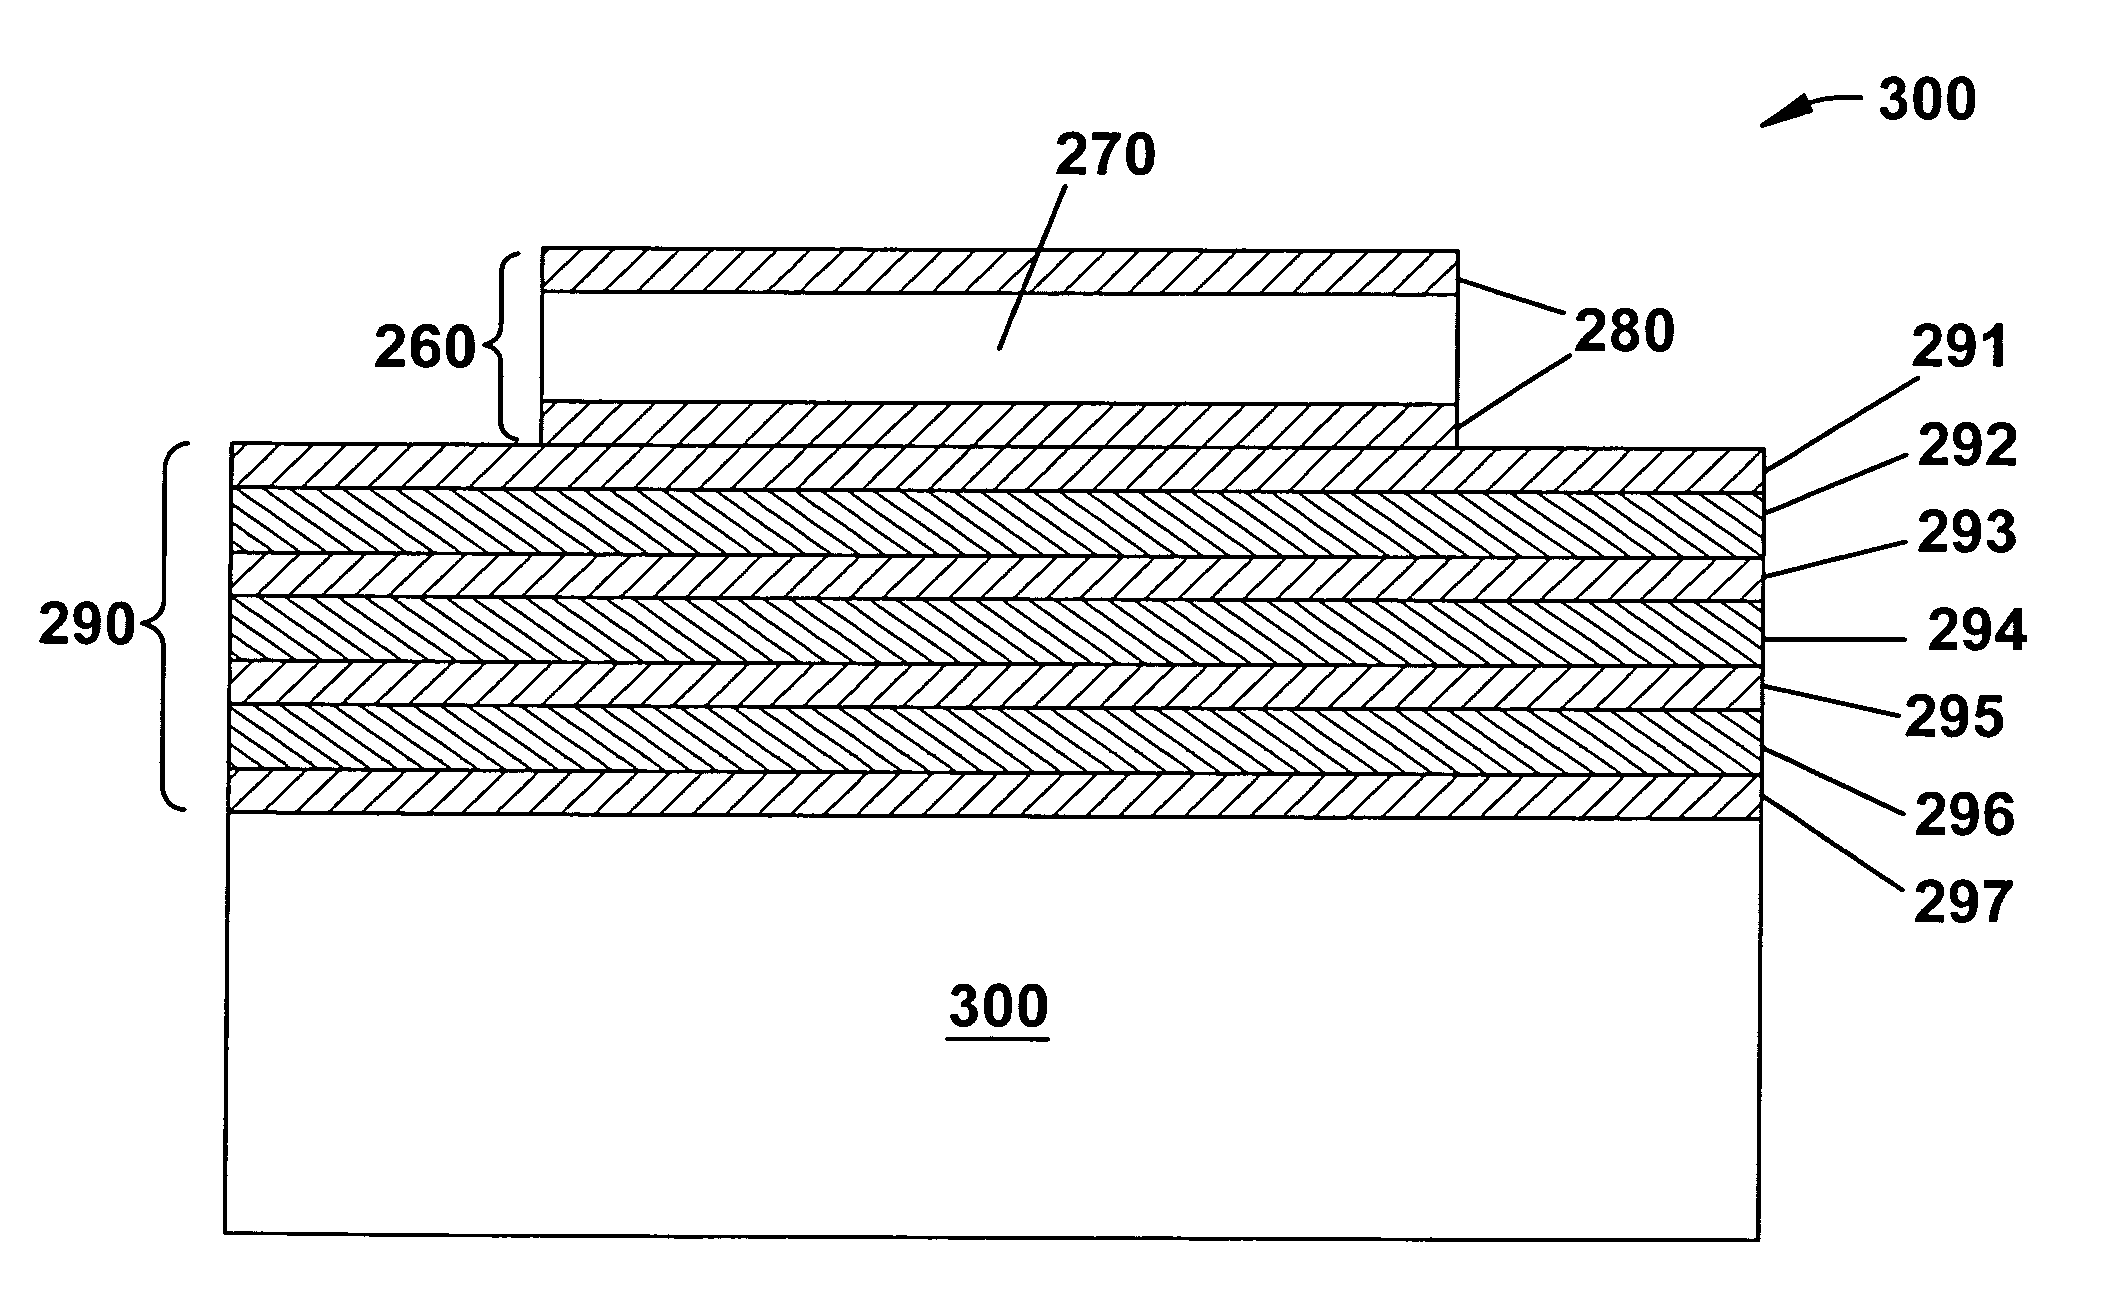 Piezoelectric resonator with an efficient all-dielectric Bragg reflector